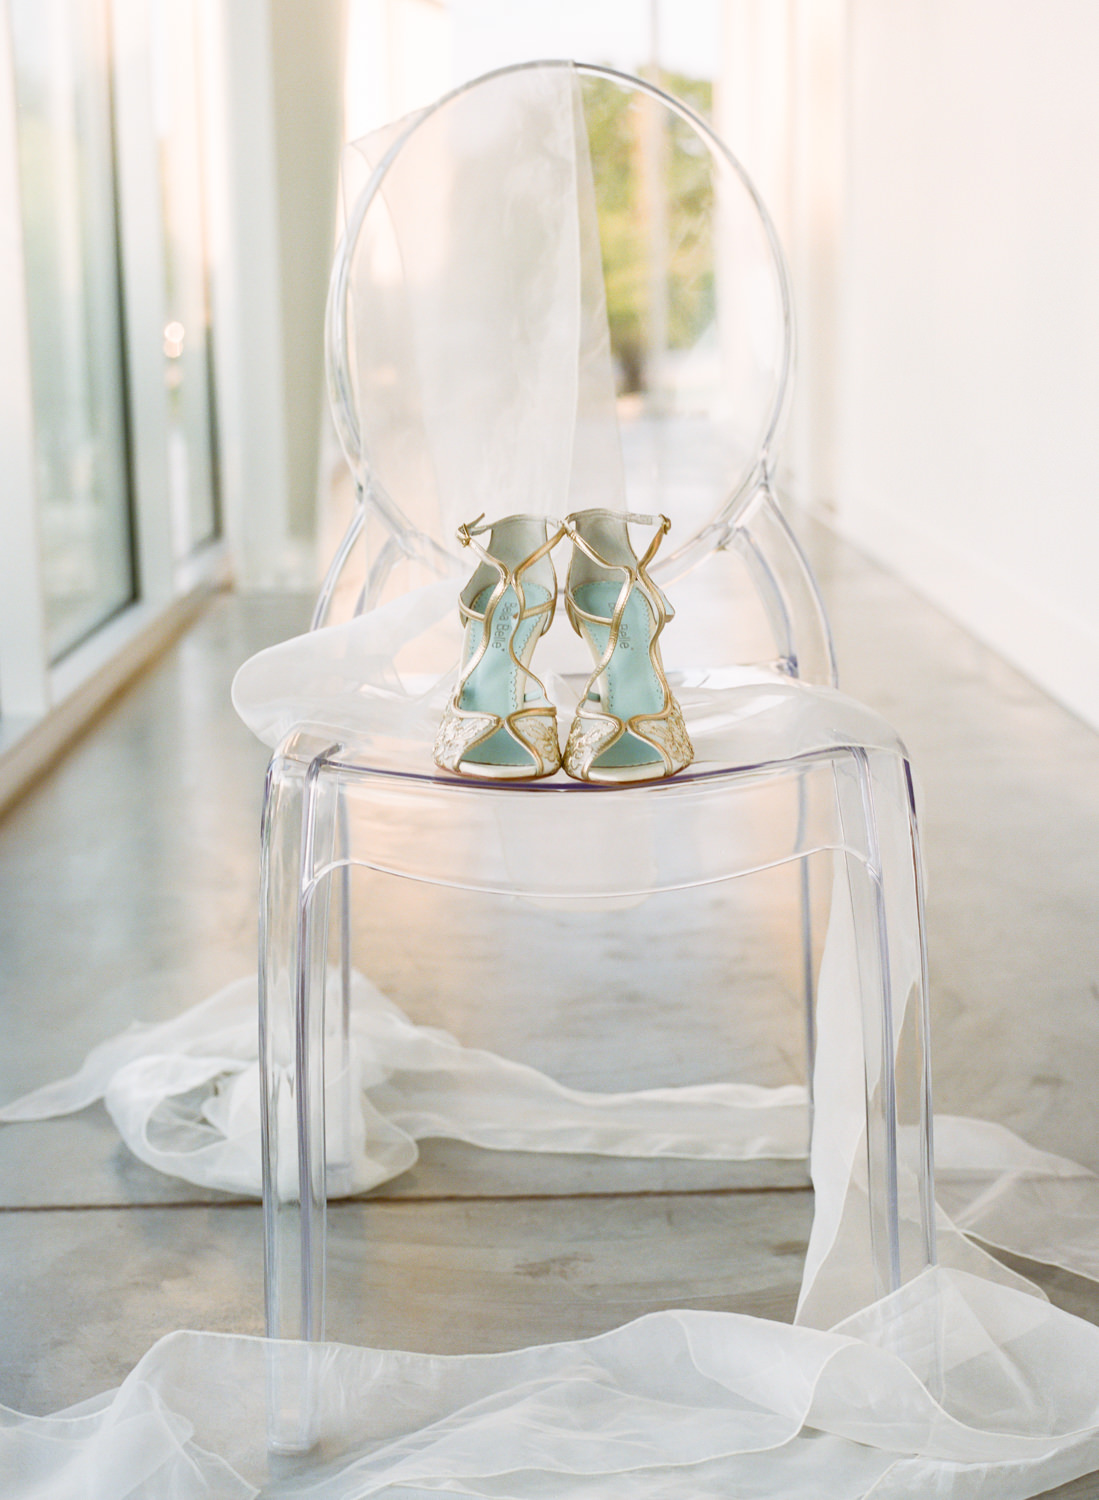 Bella Belle Wedding Shoes, Greenhouse Two Rivers, Erica Robnett Photography